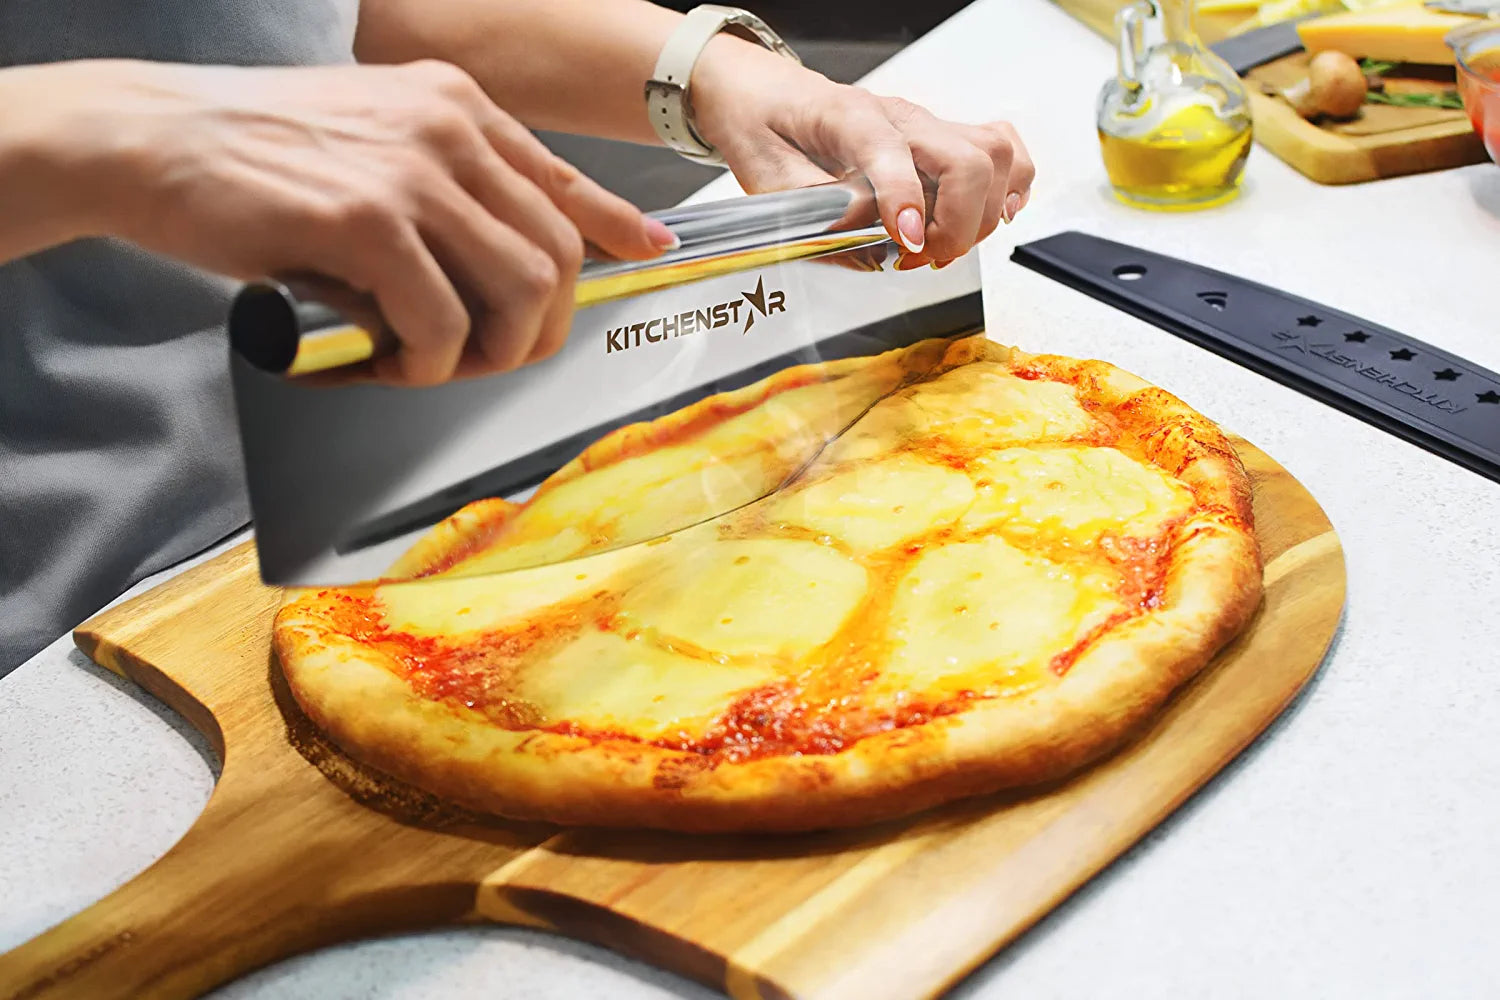 Pizza Cutter Rocker 12 inch by KitchenStar - Super Sharp Stainless Steel Slicer Knife with Hanging Hole & Protective Blade Cover (Silver) - Fast and Easy Slicing, Dishwasher Safe